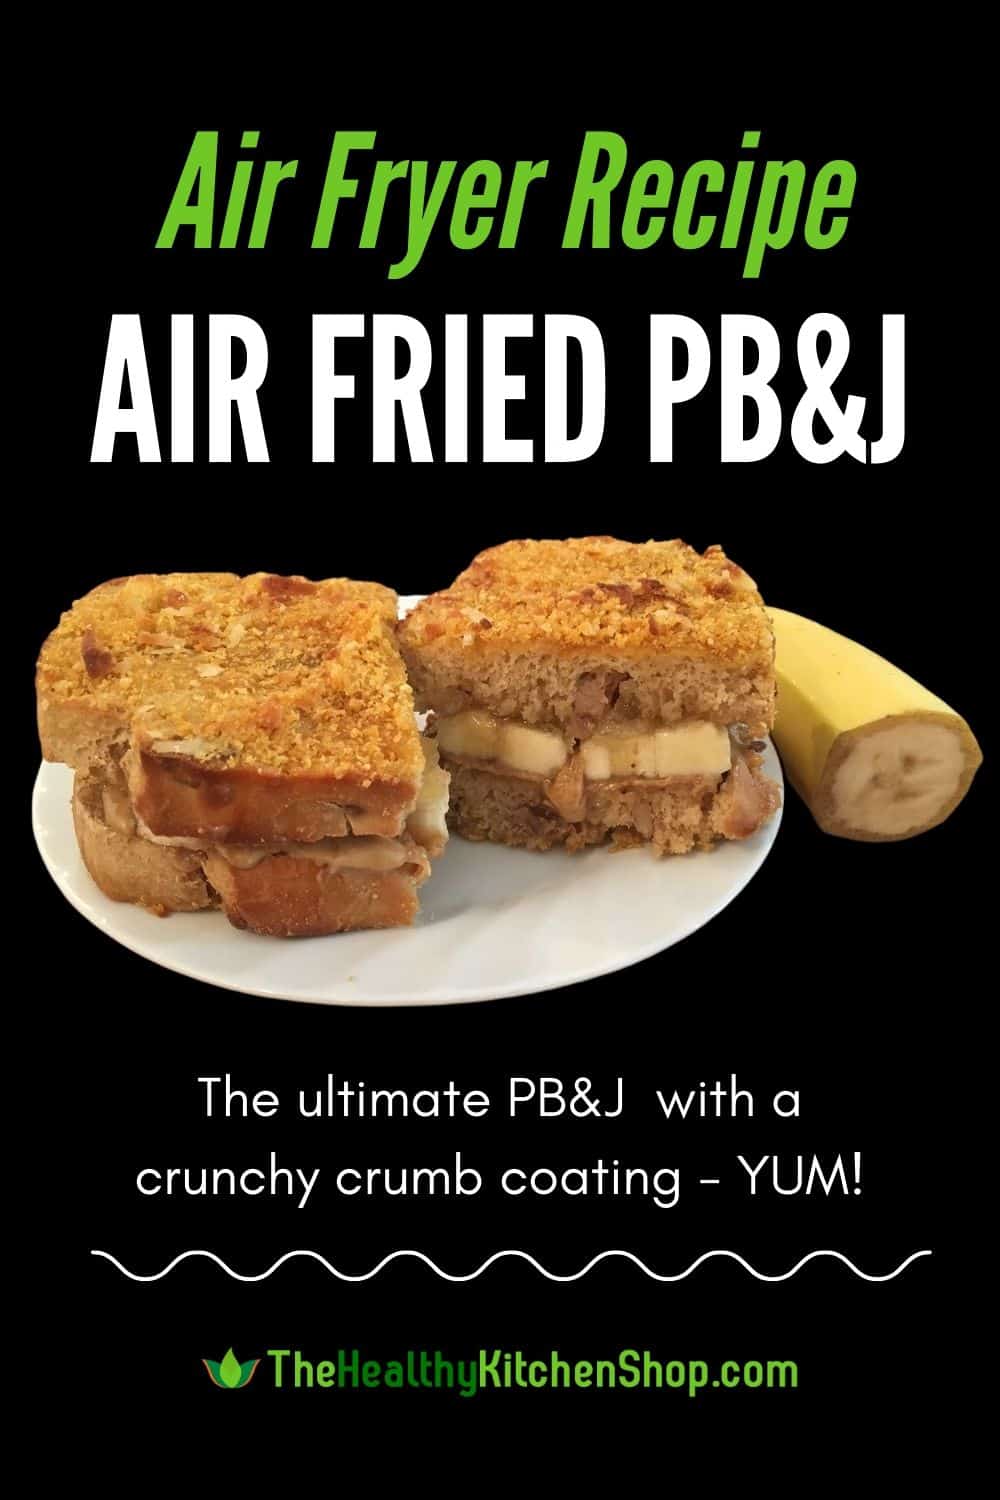 Air Fried Peanut Butter Banana Jelly Sandwich with Crunchy Crumb Coating